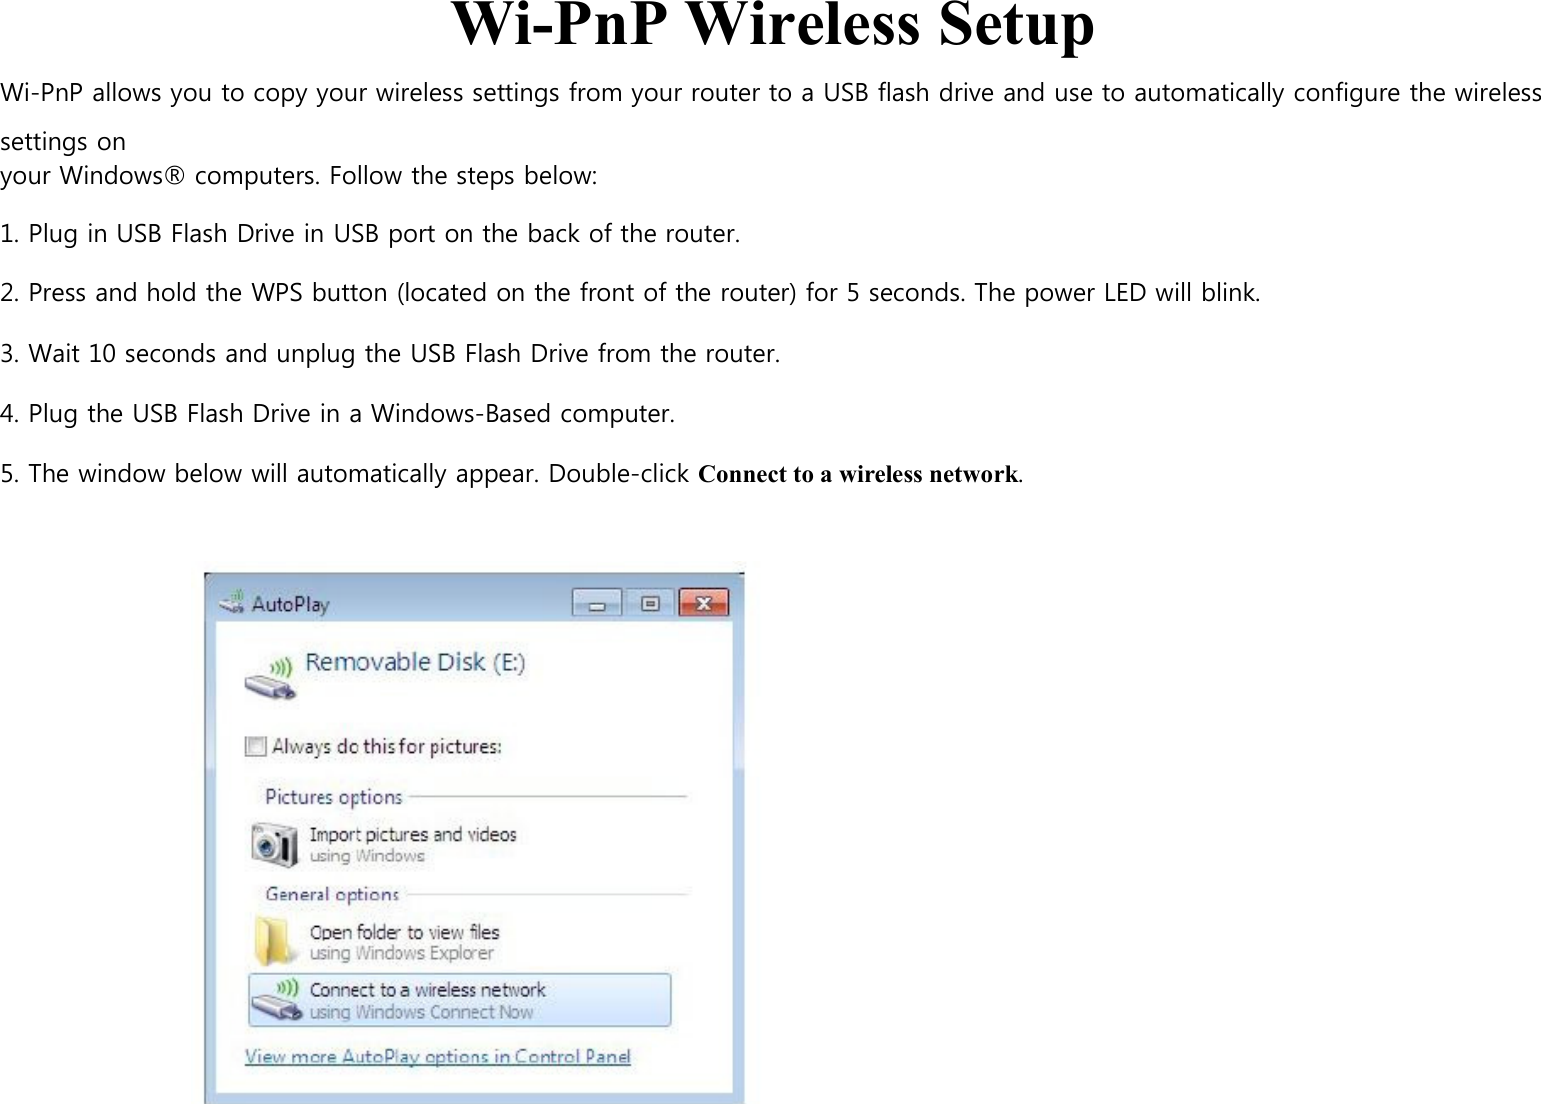  Wi-PnP Wireless Setup Wi-PnP allows you to copy your wireless settings from your router to a USB flash drive and use to automatically configure the wireless settings on your Windows® computers. Follow the steps below:  1. Plug in USB Flash Drive in USB port on the back of the router.  2. Press and hold the WPS button (located on the front of the router) for 5 seconds. The power LED will blink.  3. Wait 10 seconds and unplug the USB Flash Drive from the router.  4. Plug the USB Flash Drive in a Windows-Based computer.  5. The window below will automatically appear. Double-click Connect to a wireless network.                                                           